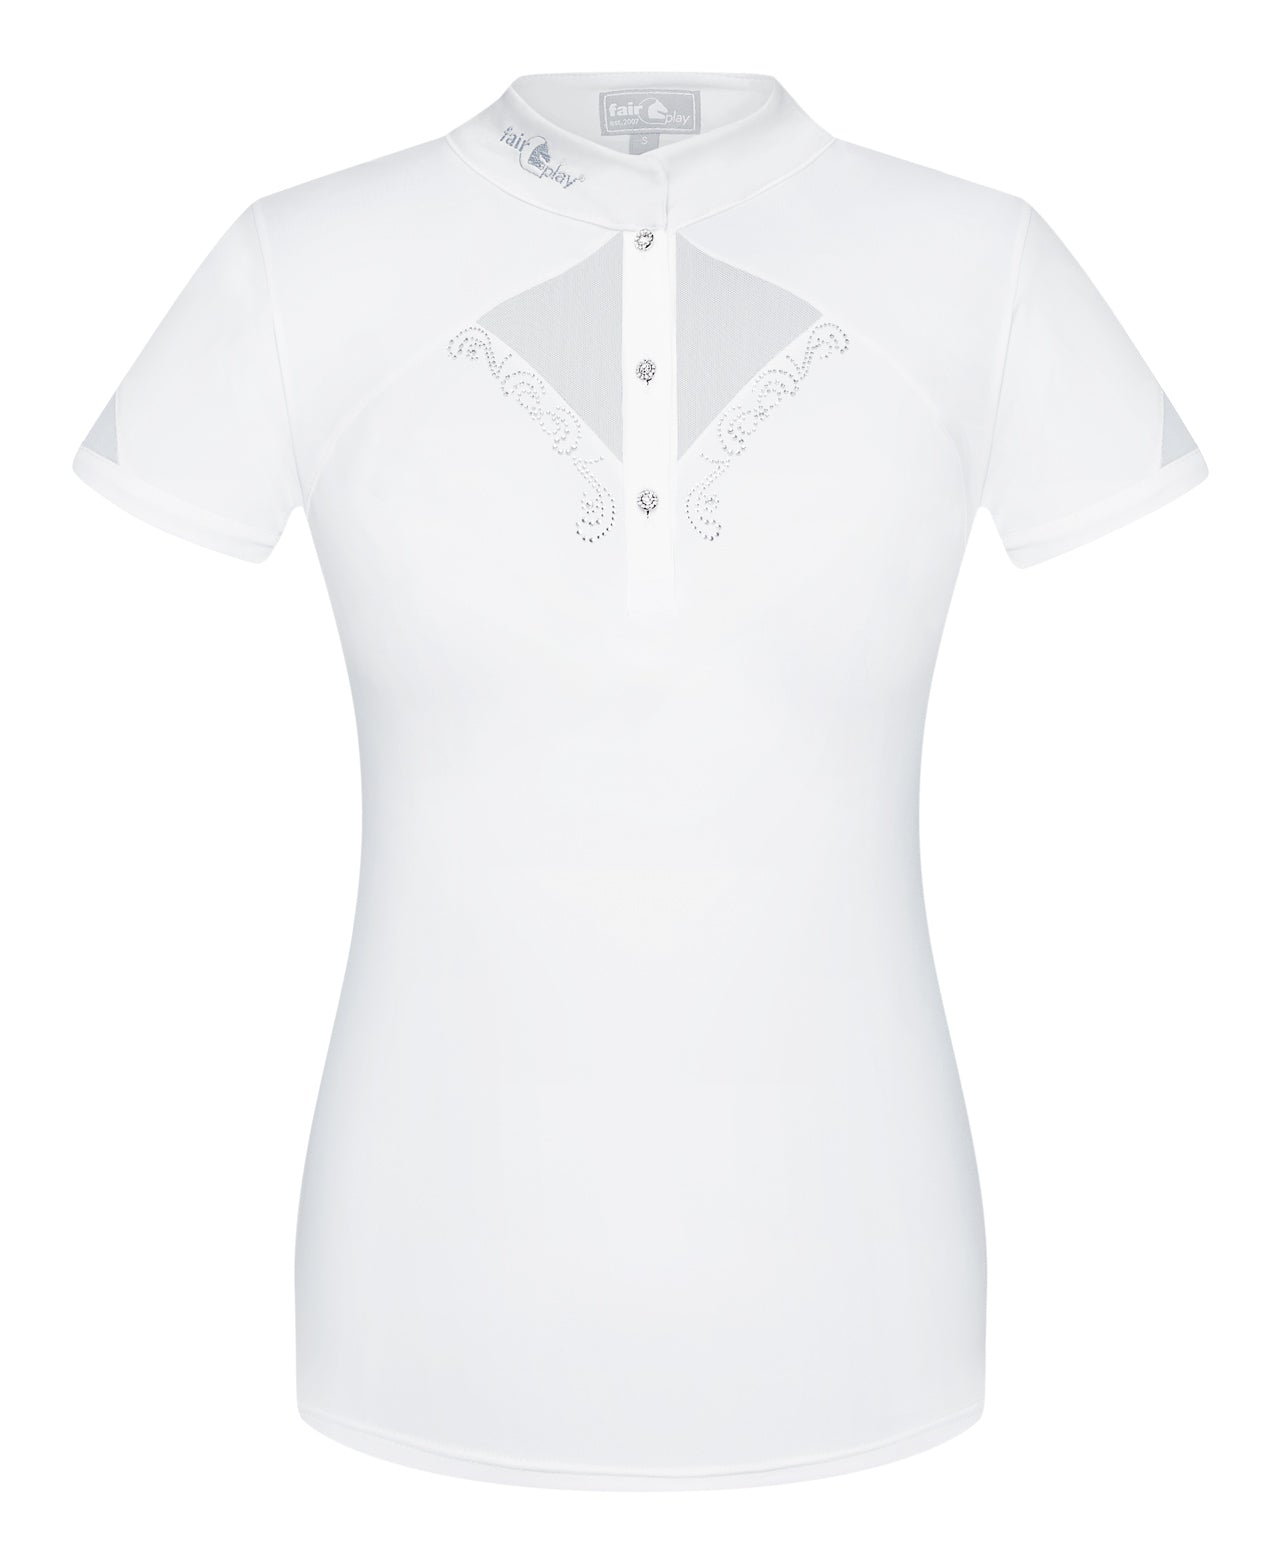 White classy ladies competition shirt